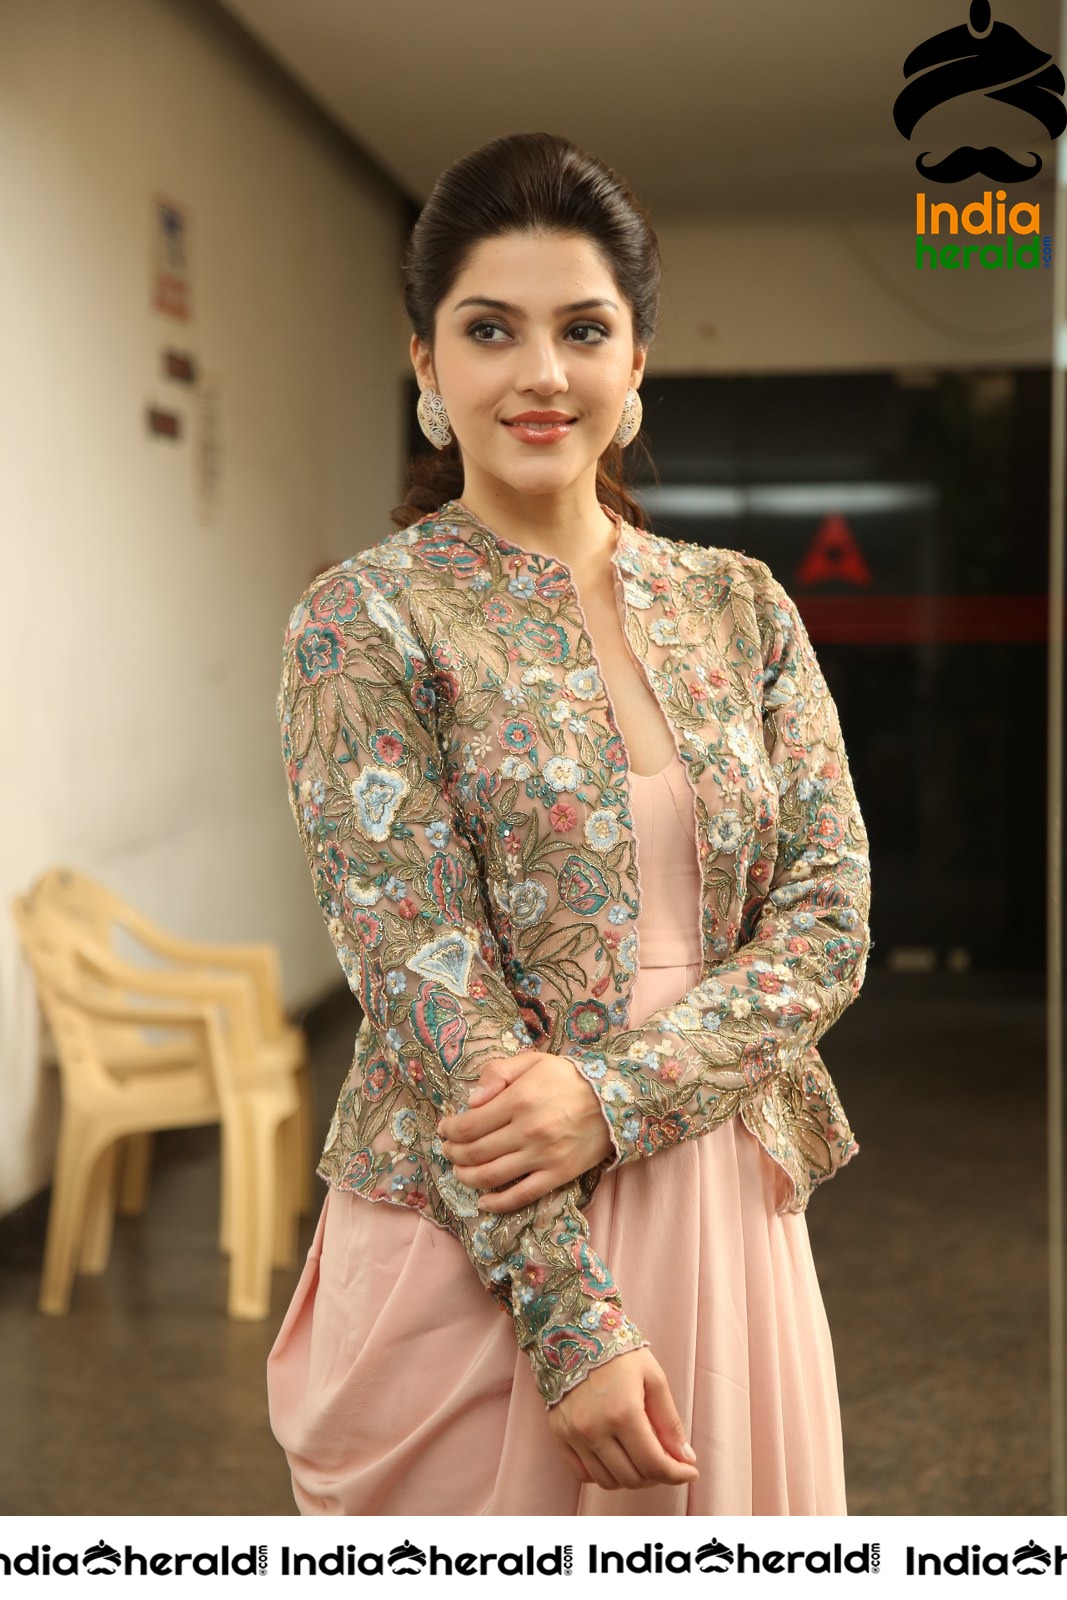 Mehreen Kaur Looking Sexy and Gorgeous in Latest Photoshoot Set 1